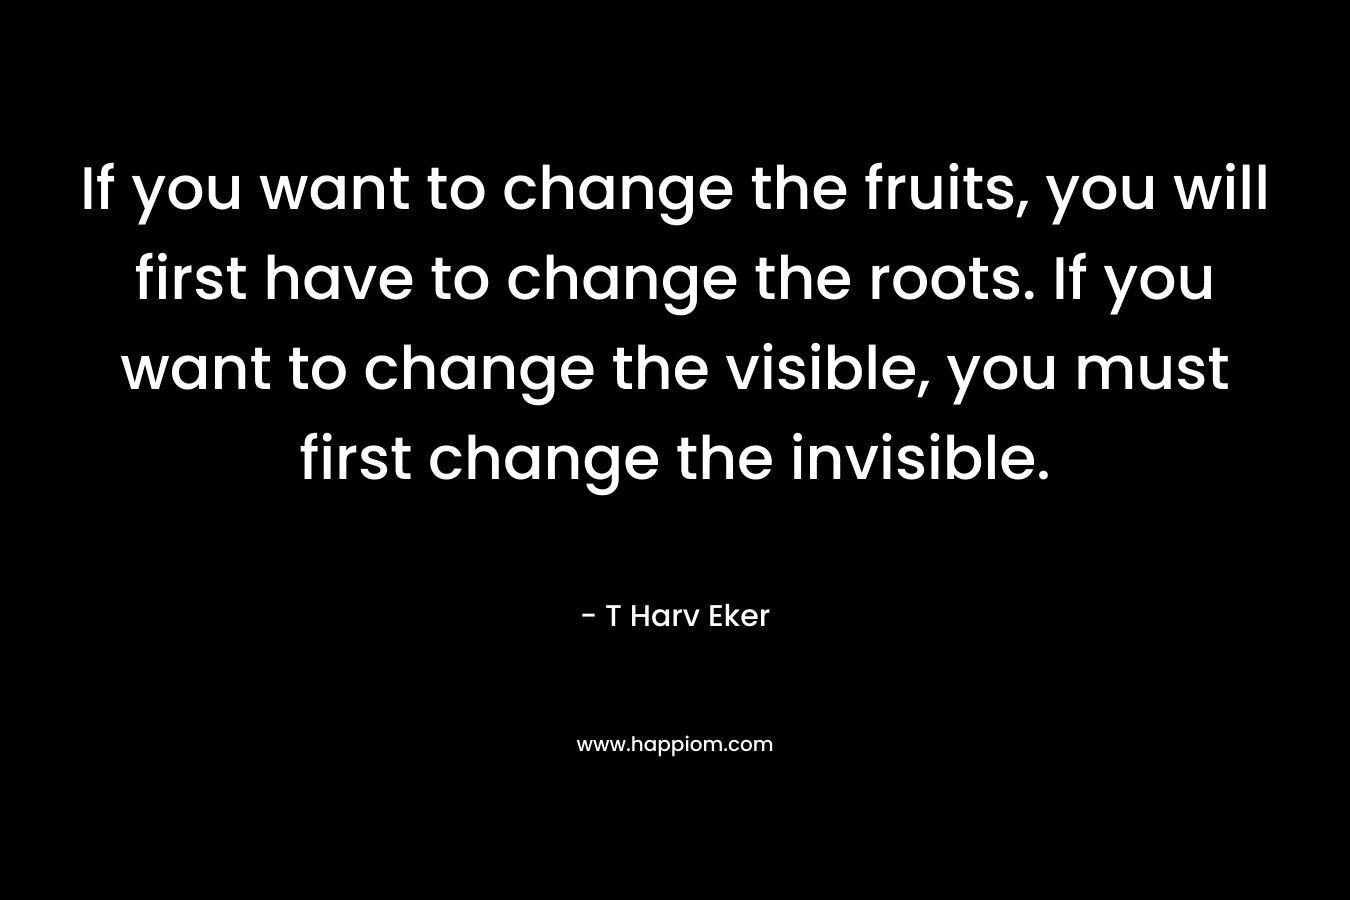 If you want to change the fruits, you will first have to change the roots. If you want to change the visible, you must first change the invisible.